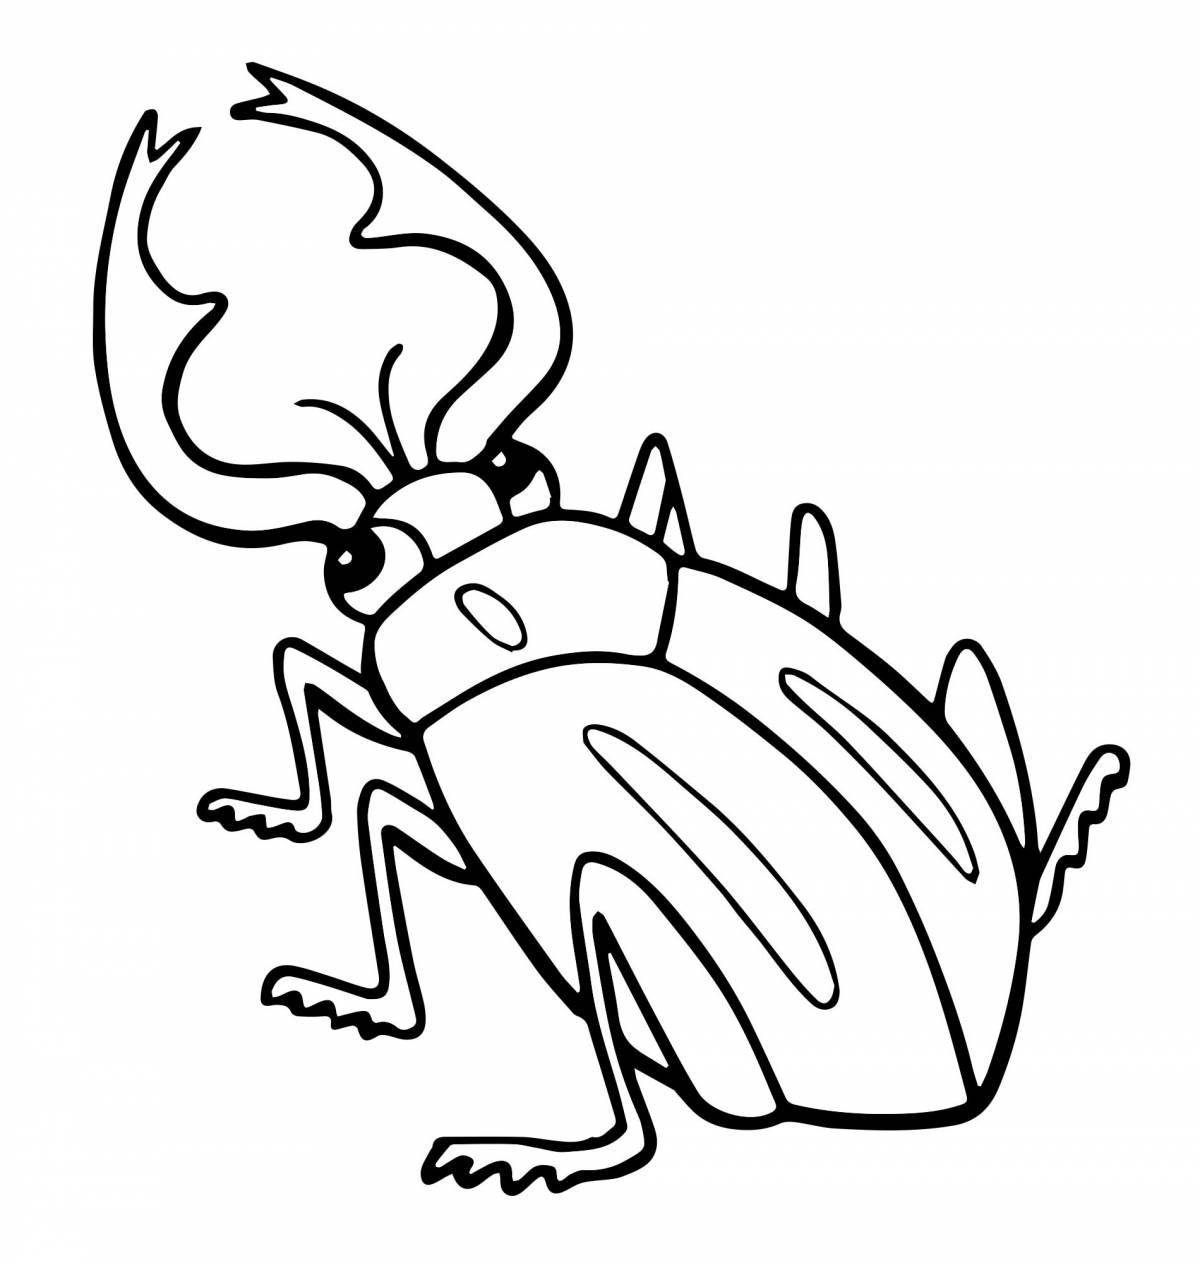 Coloring page innovation bug